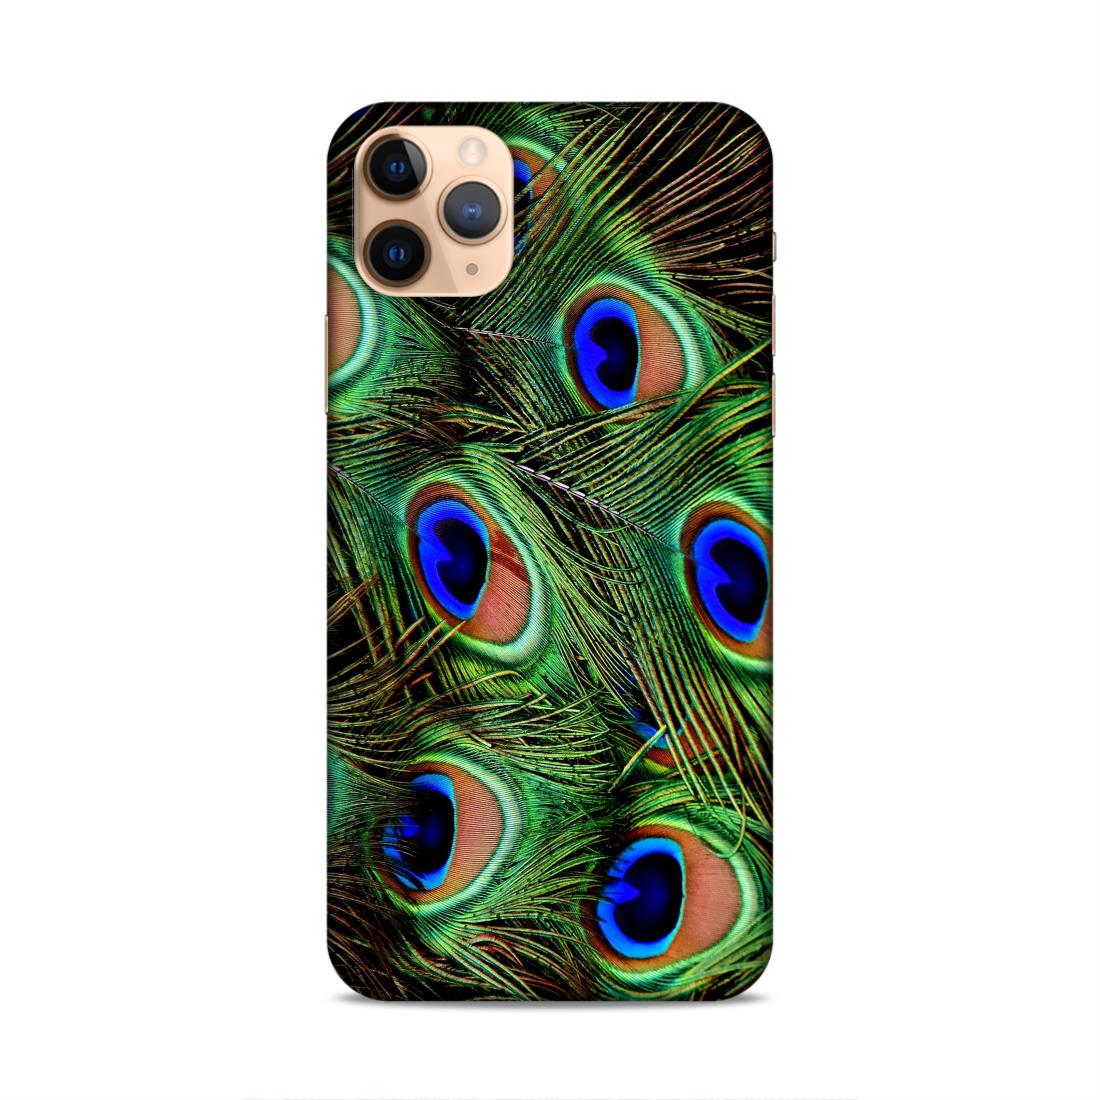 Peacock Feather Hard Back Case For Apple iPhone 11 Pro